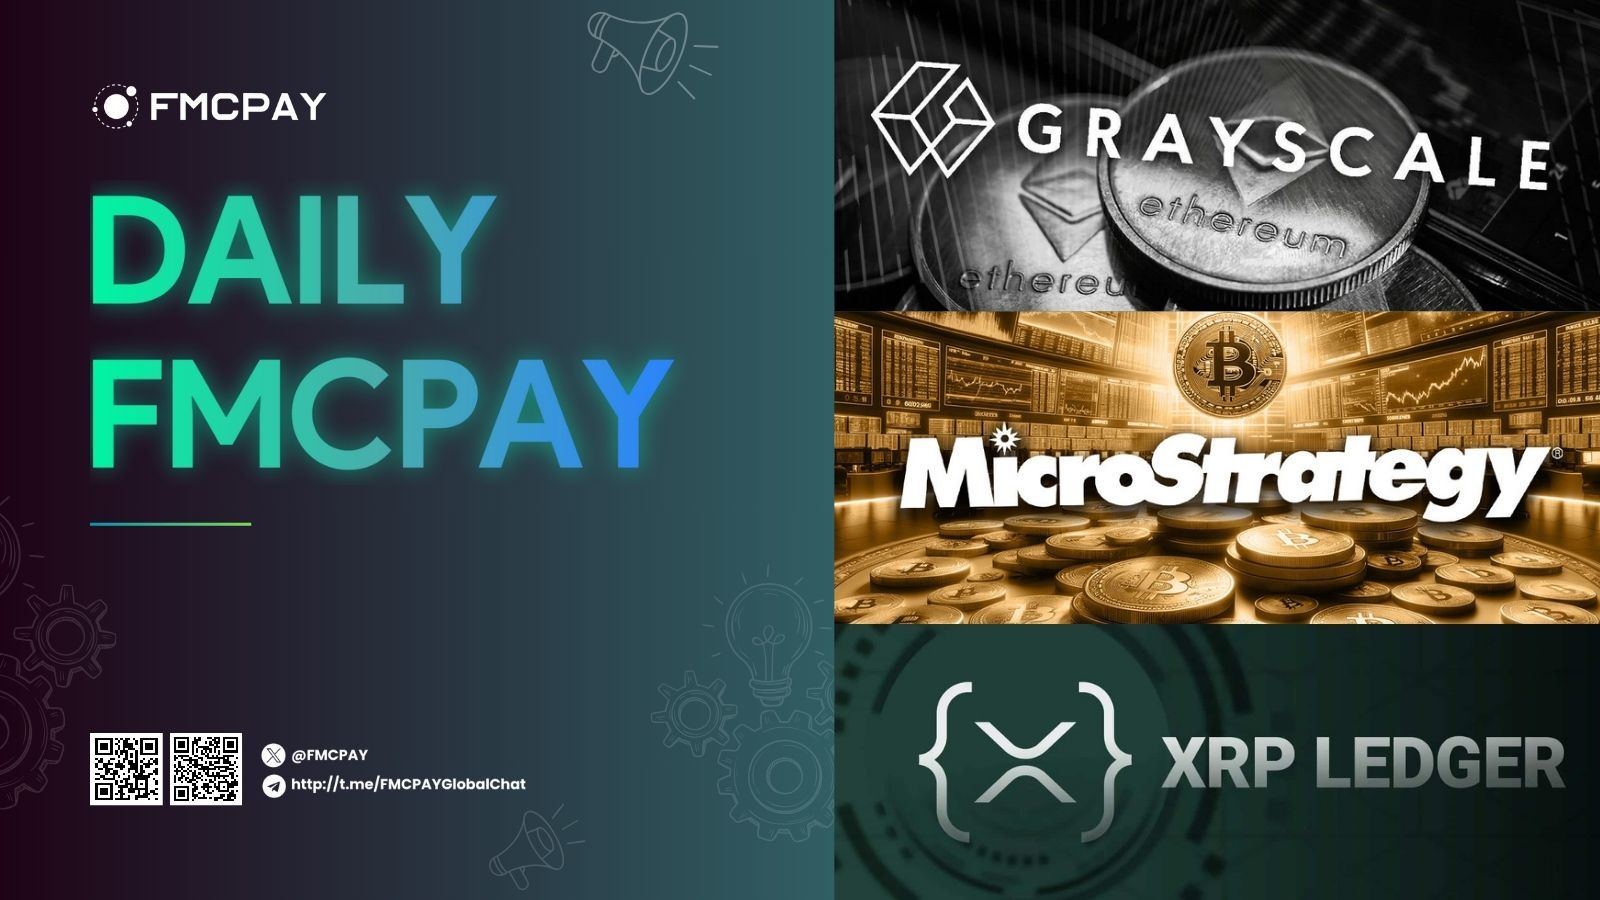 fmcpay grayscale ethereum etf outflows cross 2b more pain ahead